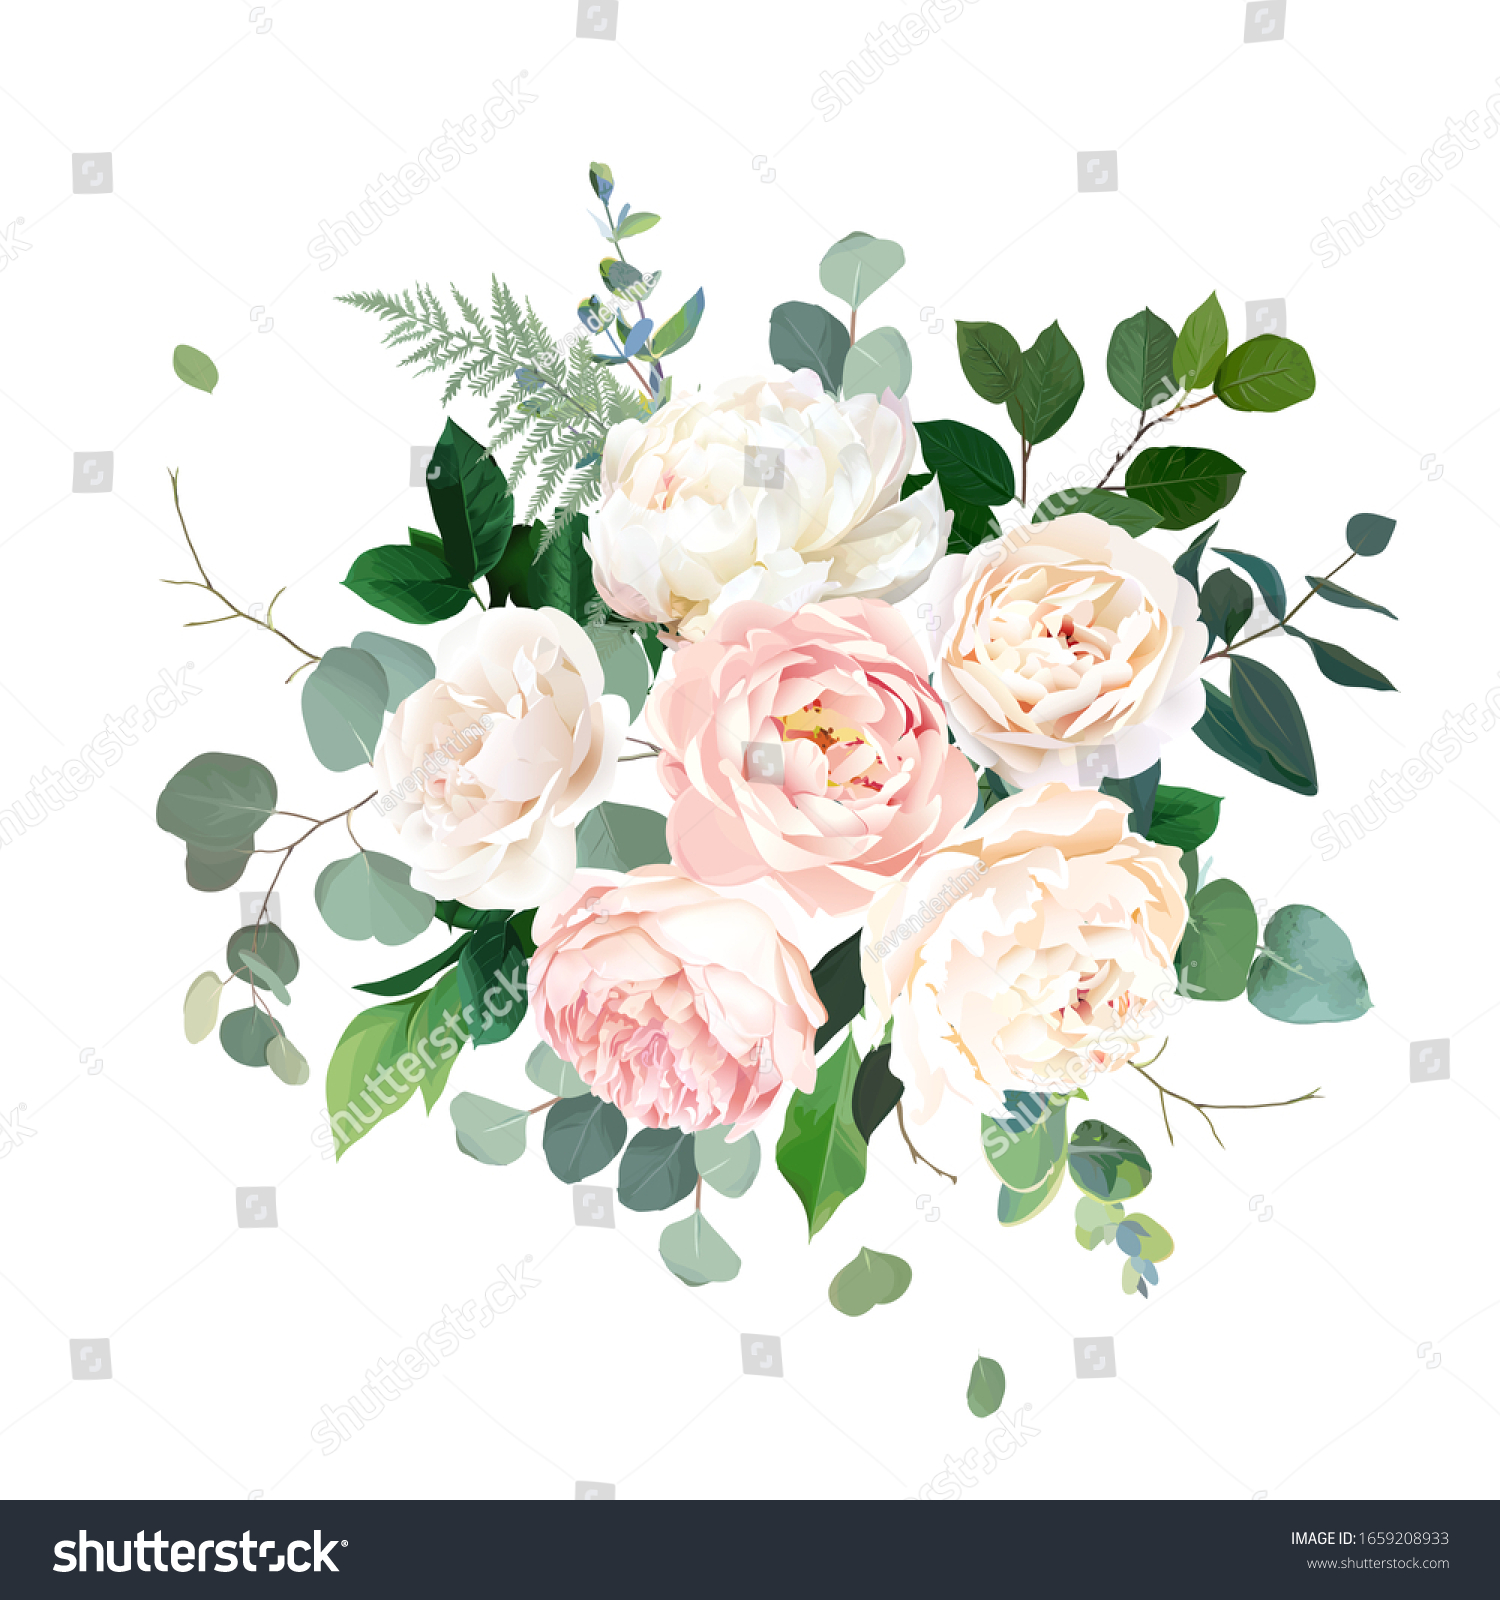 Dusty Pink Blush White Creamy Rose Stock Vector (Royalty Free ...